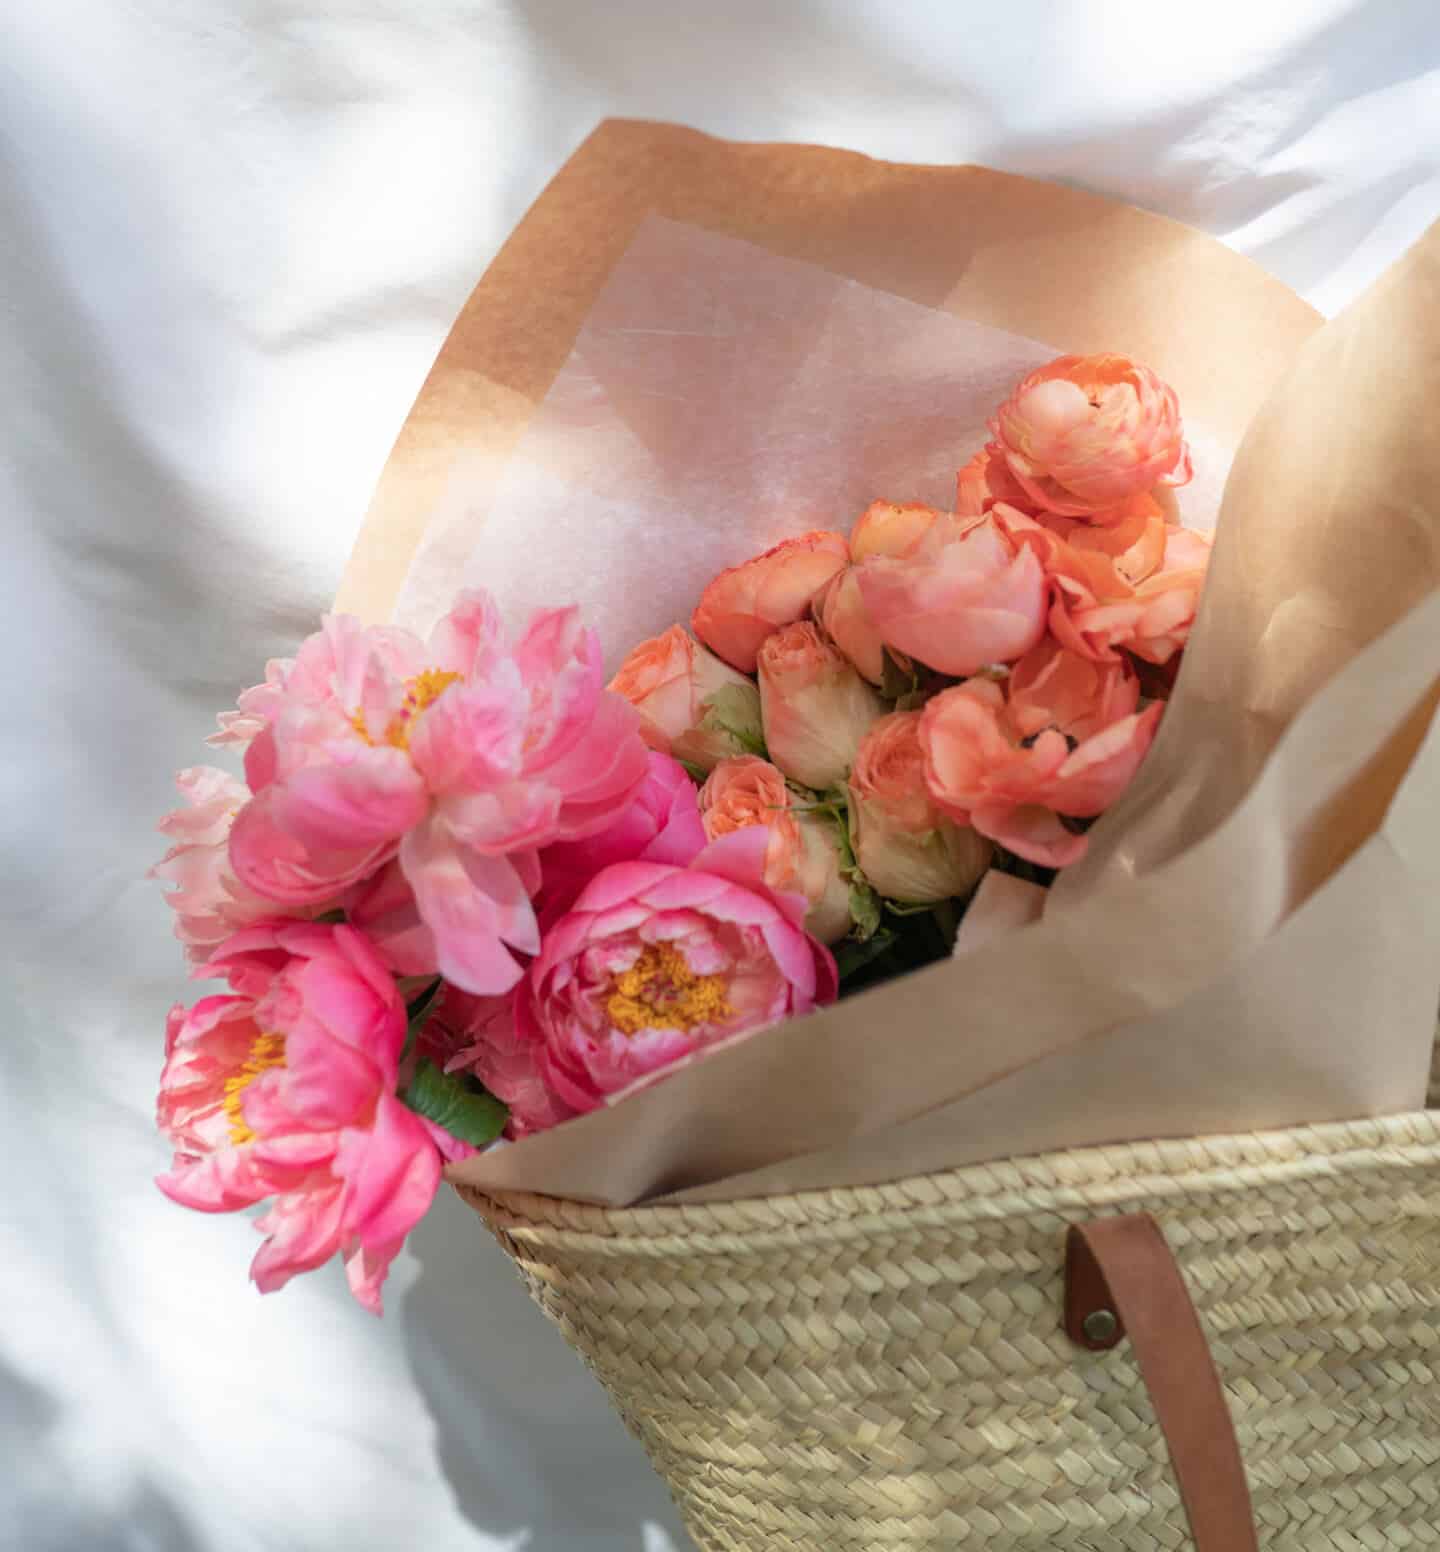 Pink Peony flowers wrapped in paper inside a woven palm leaf bag